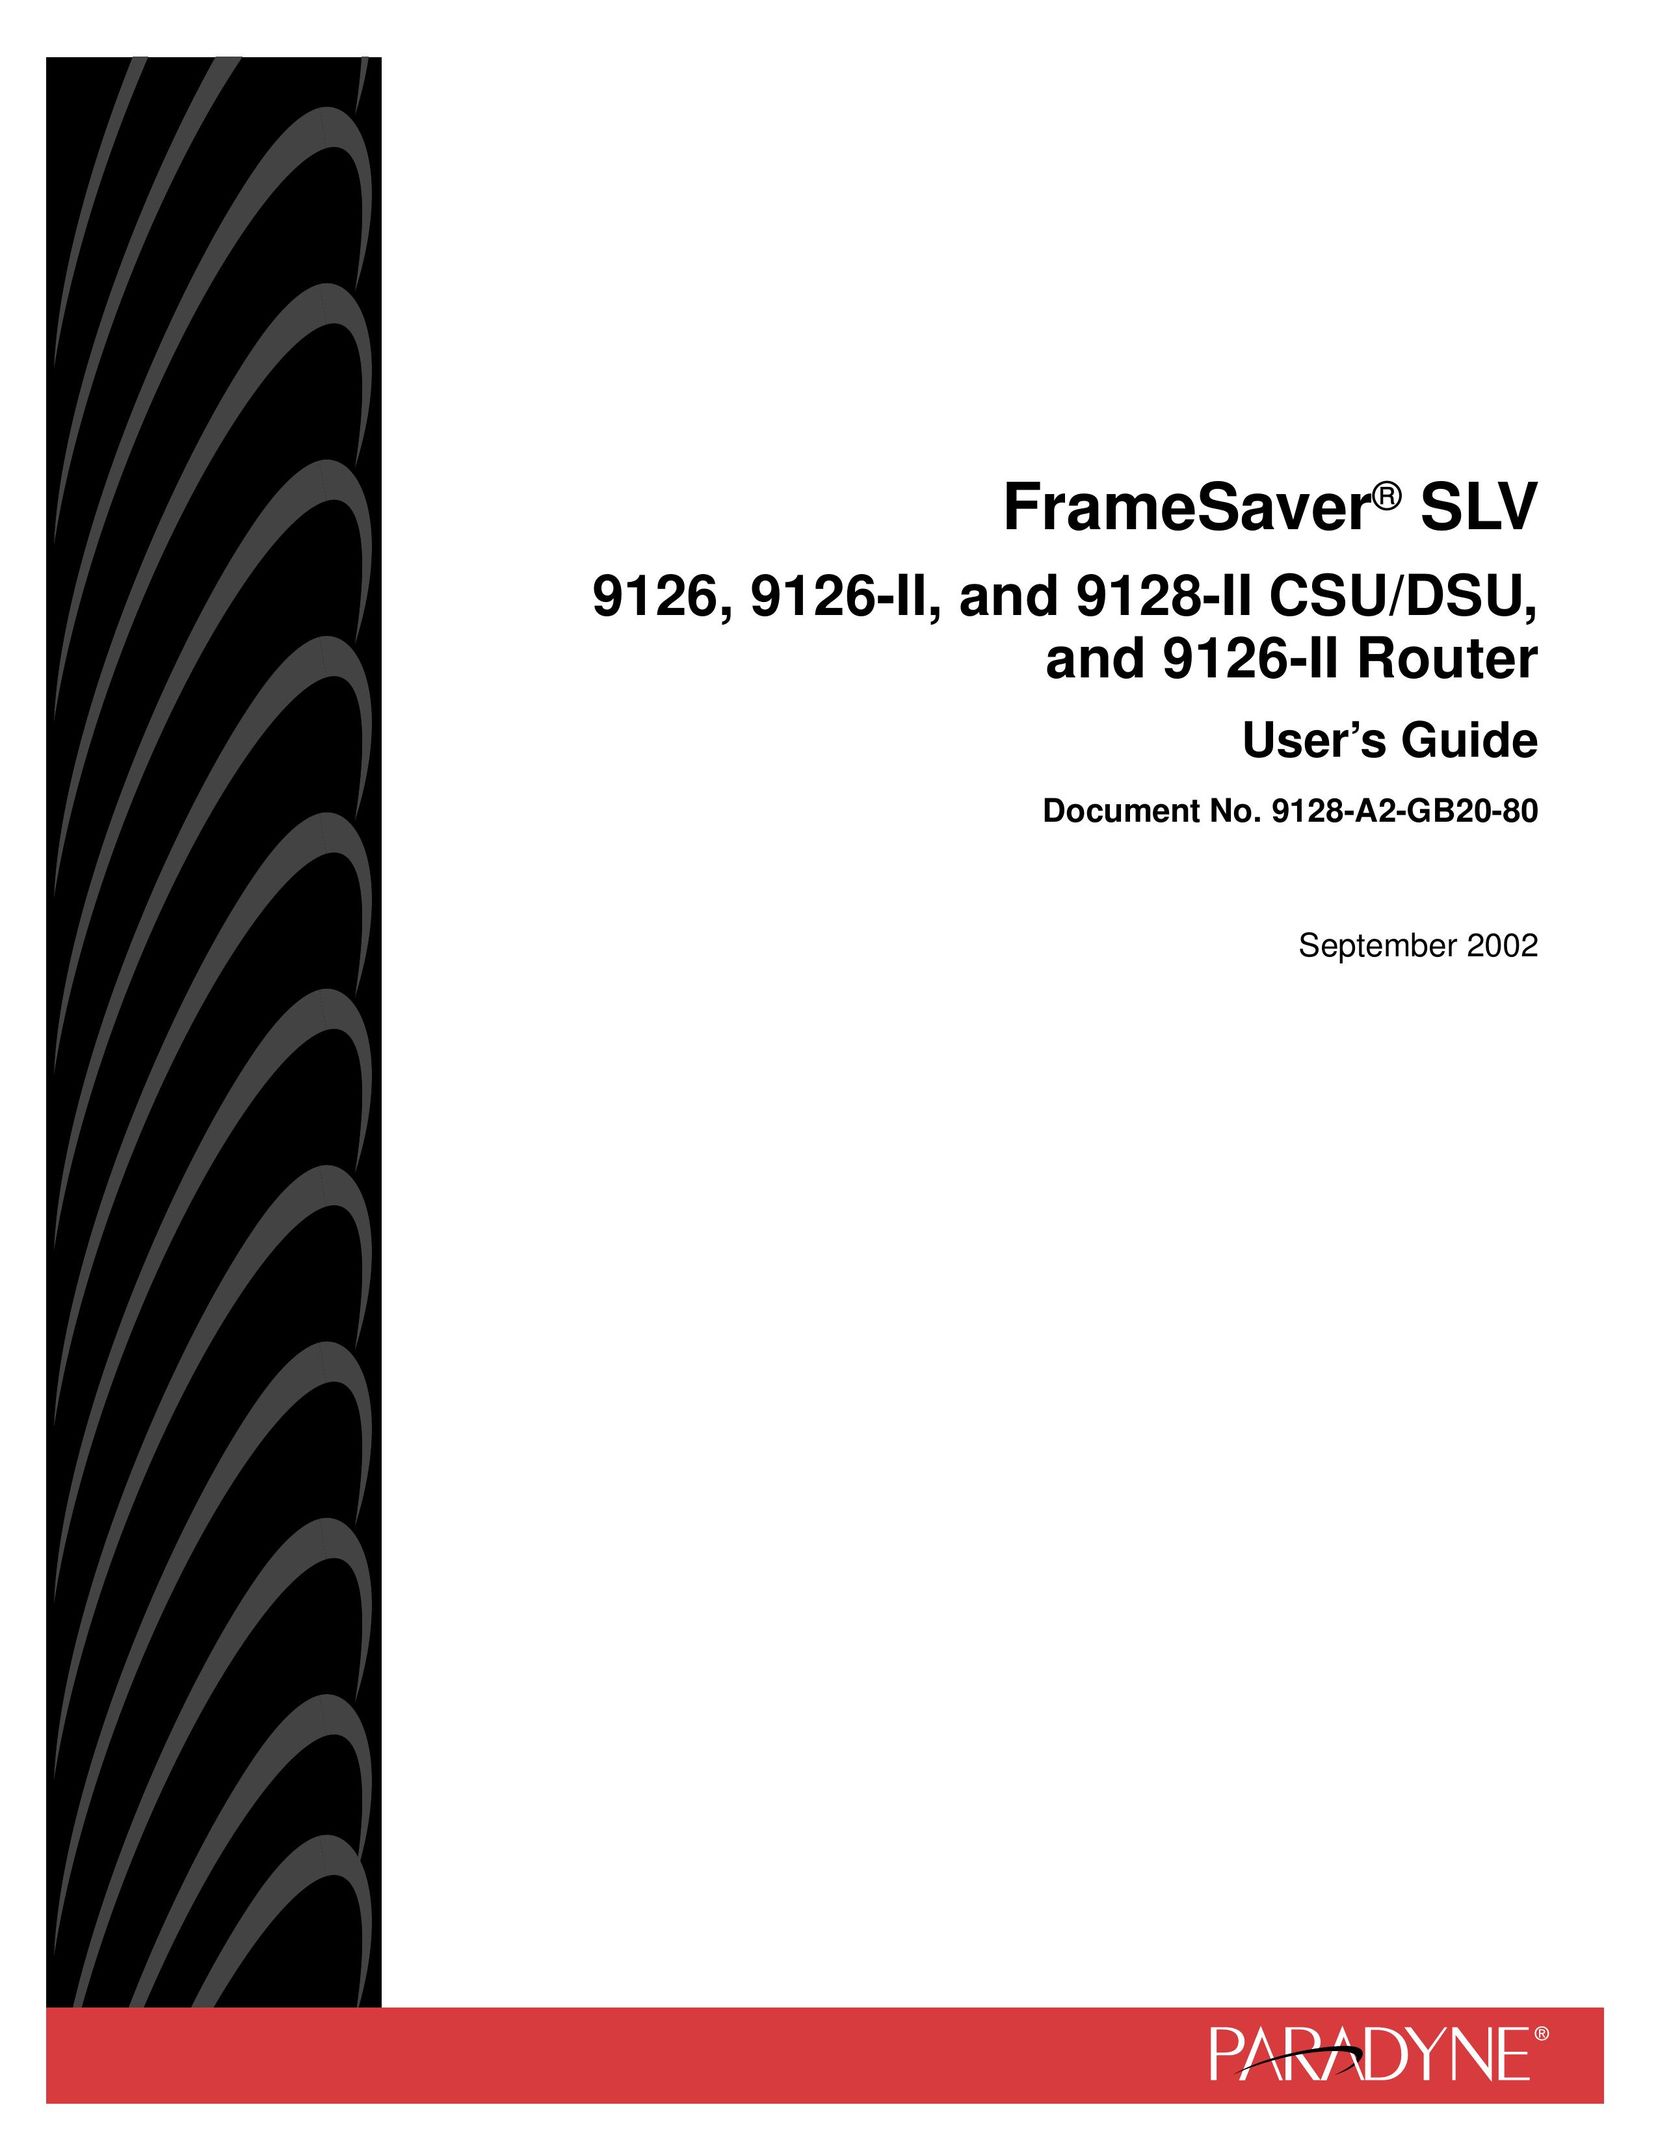 Paradyne 9126 Network Router User Manual